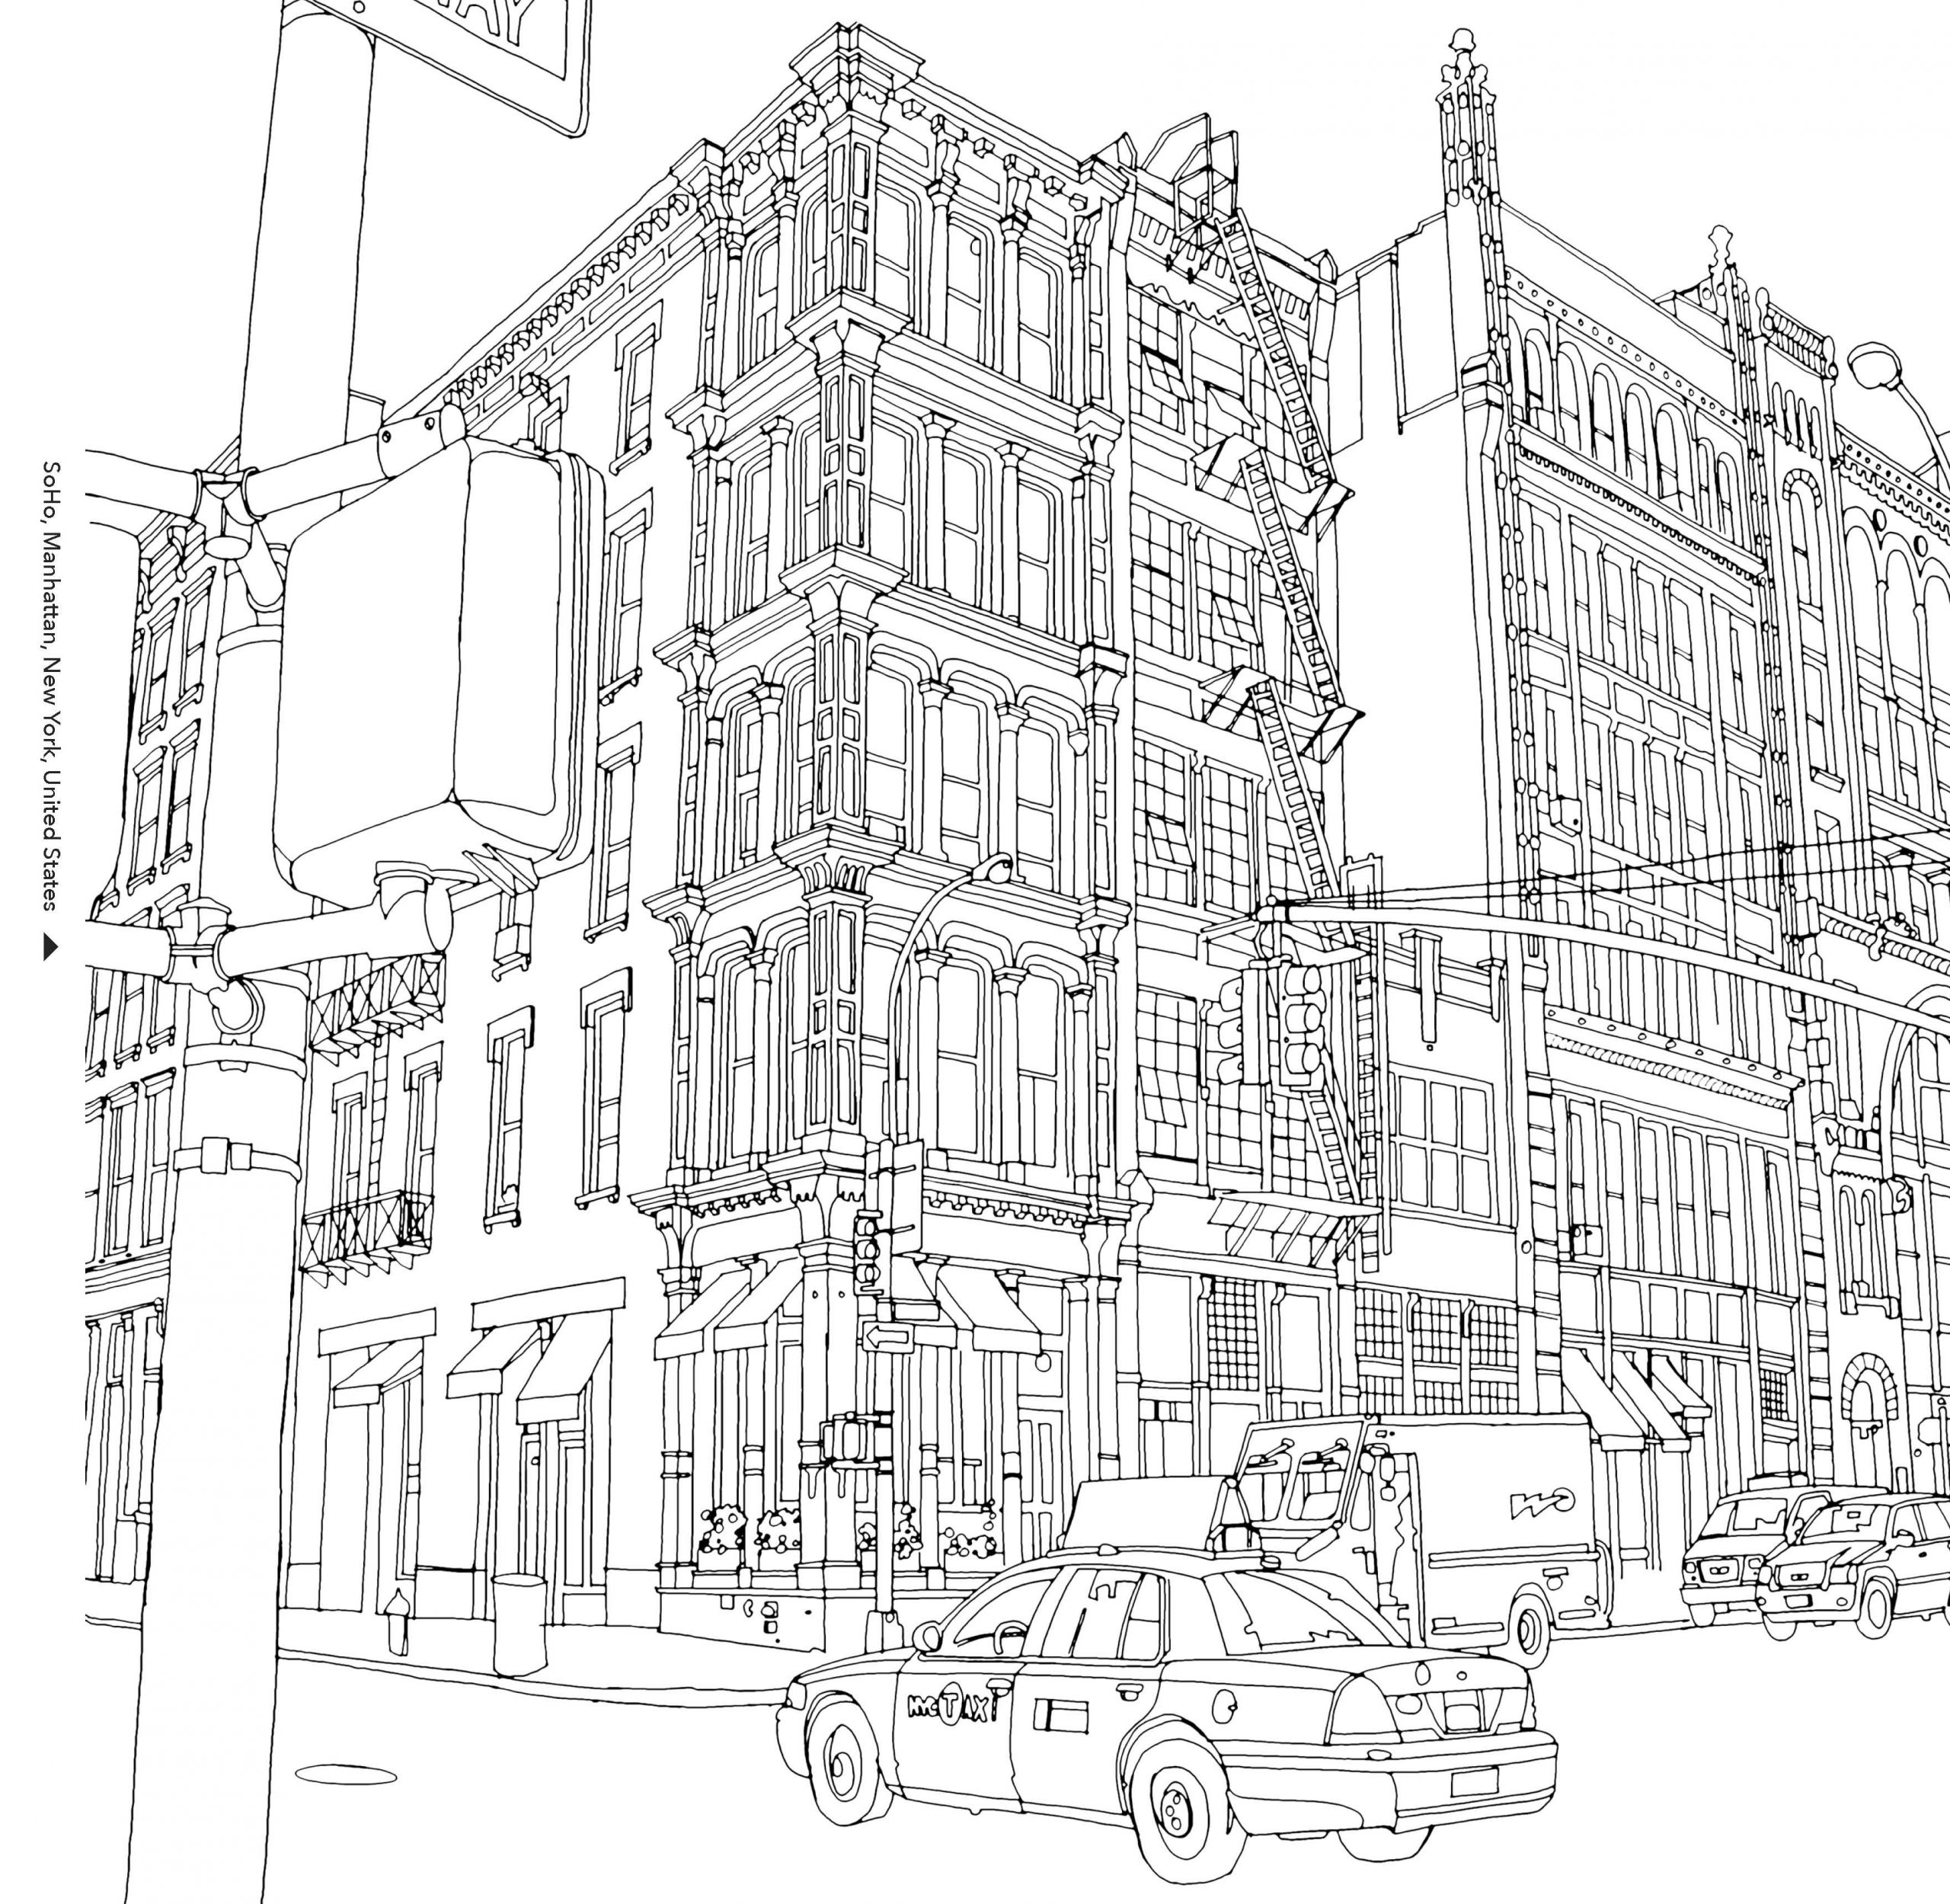 New Coloring Book For Adults
 The Surprising Popularity of An Urban Themed Coloring Book